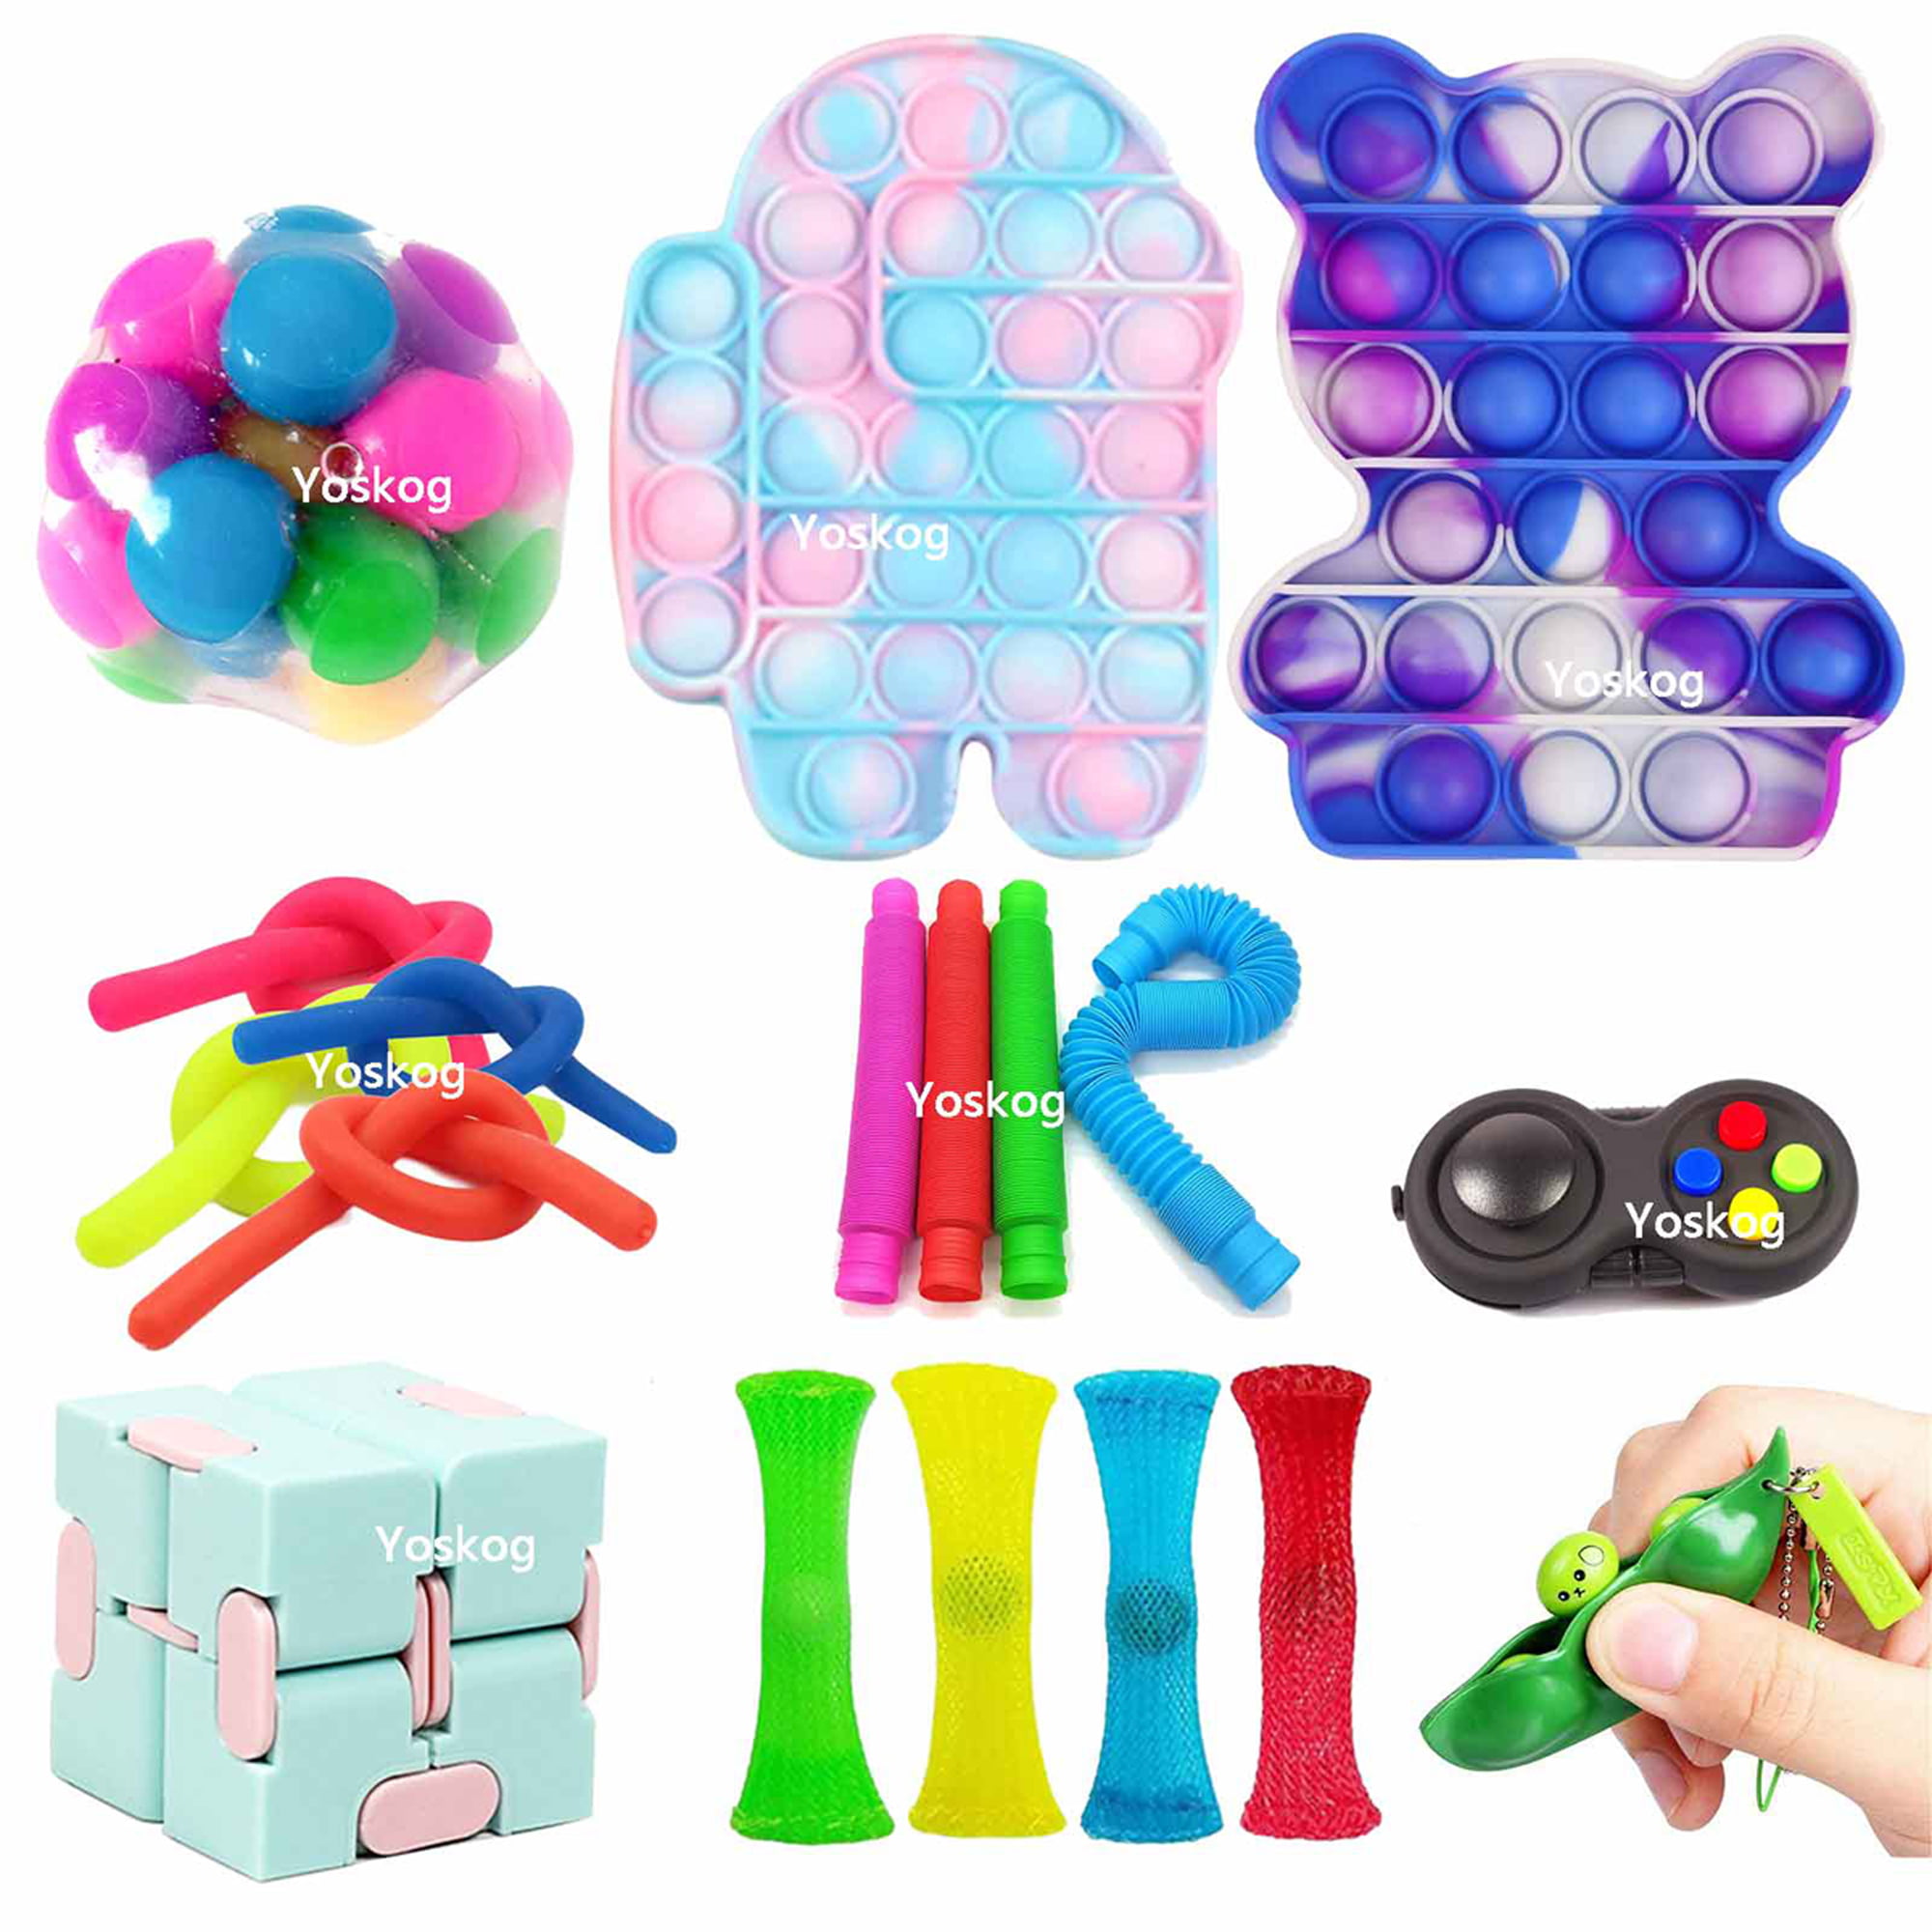 20 Pieces Sensory Fidget Toy Set for Autism,Stress Relief Fidget Toys for Kids Adults,Anxiety Fidget Toy,Pop It Fidget Toys Set,Push Pop Bubble Fidget Sensory Toy